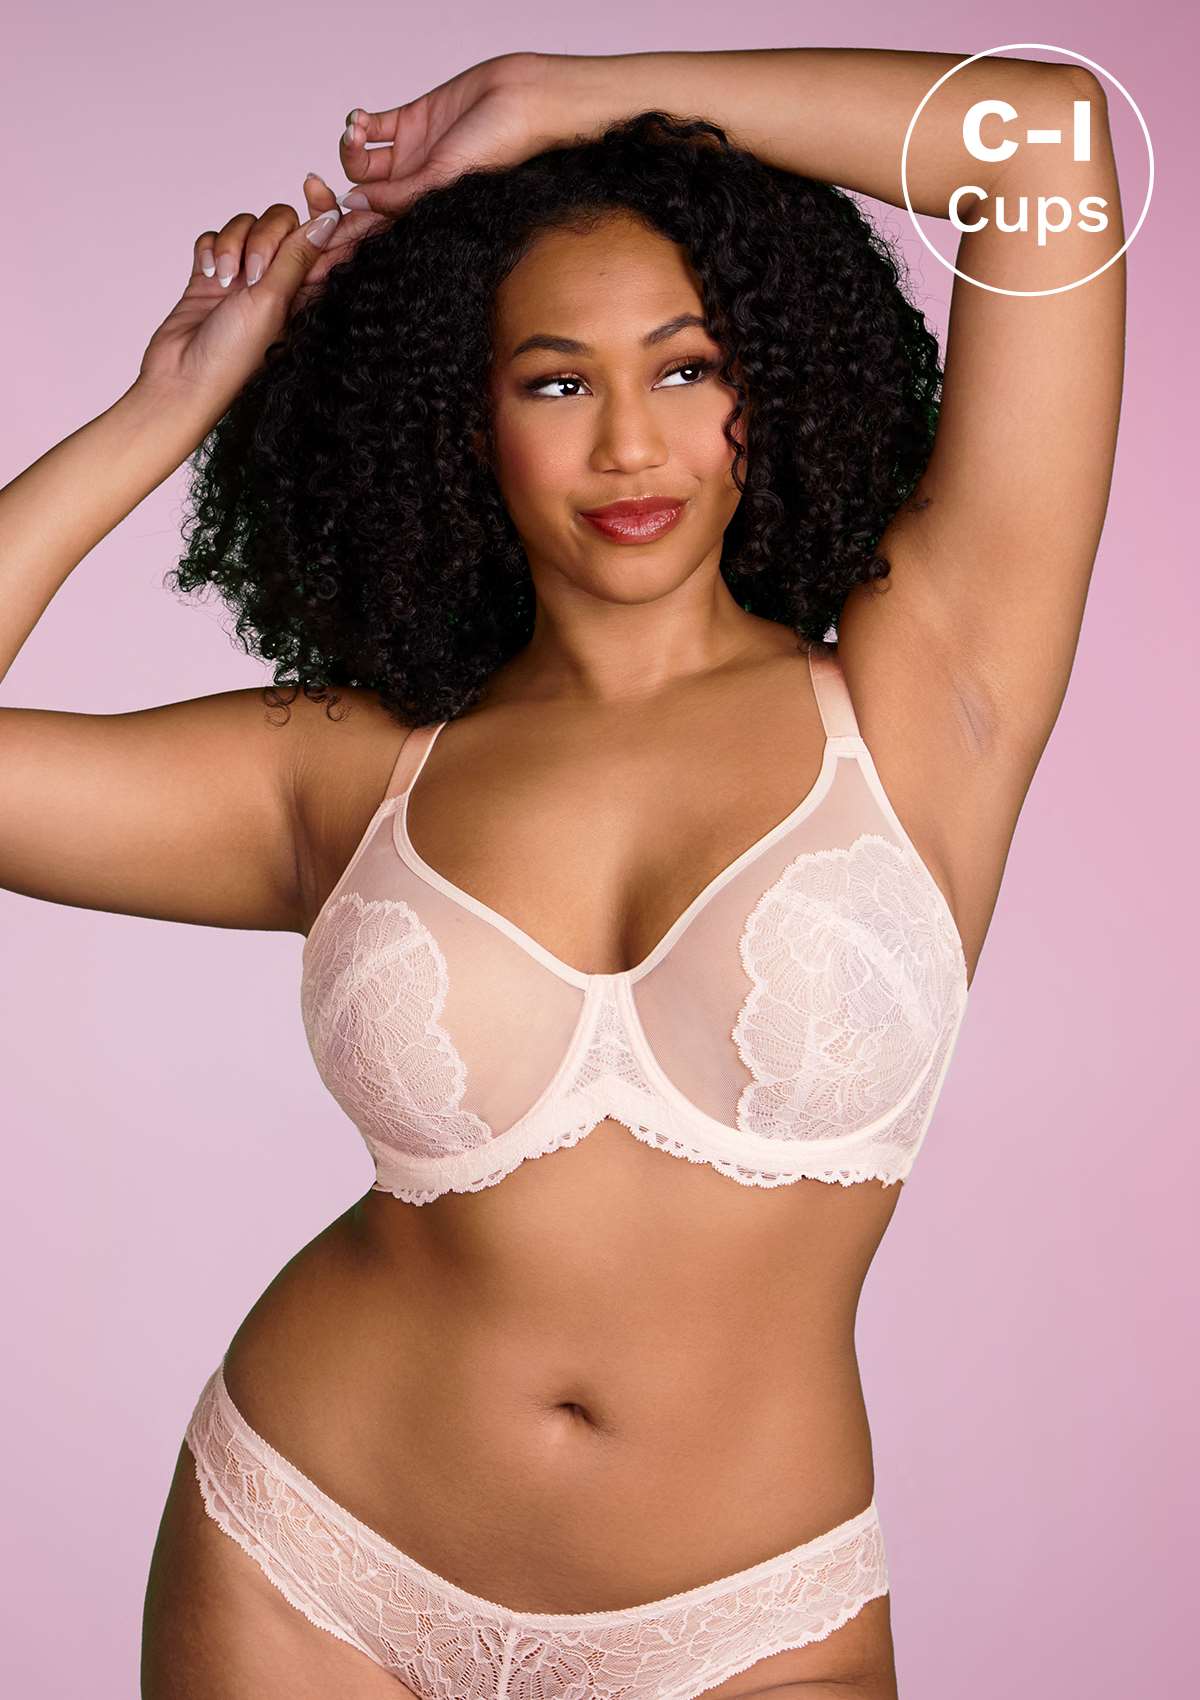 HSIA Blossom Sheer Lace Bra: Comfortable Underwire Bra For Big Busts - White / 42 / H